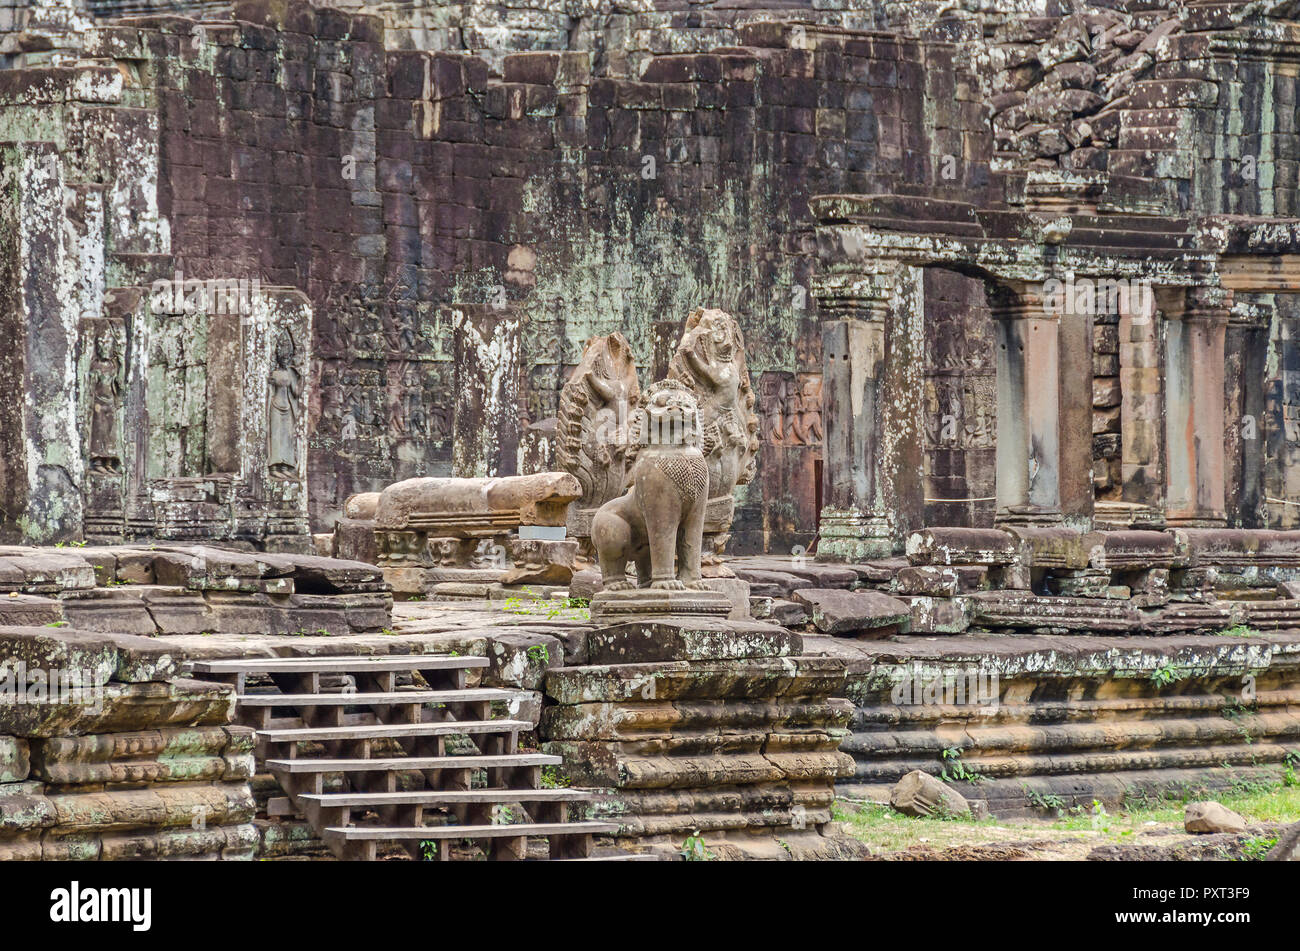 Unrestaured guardian statues of a Cambodian naga, garudas and a lion and bas-reliefs of devatas in the Bayon temple in Angkor Thom in Cambodia Stock Photo